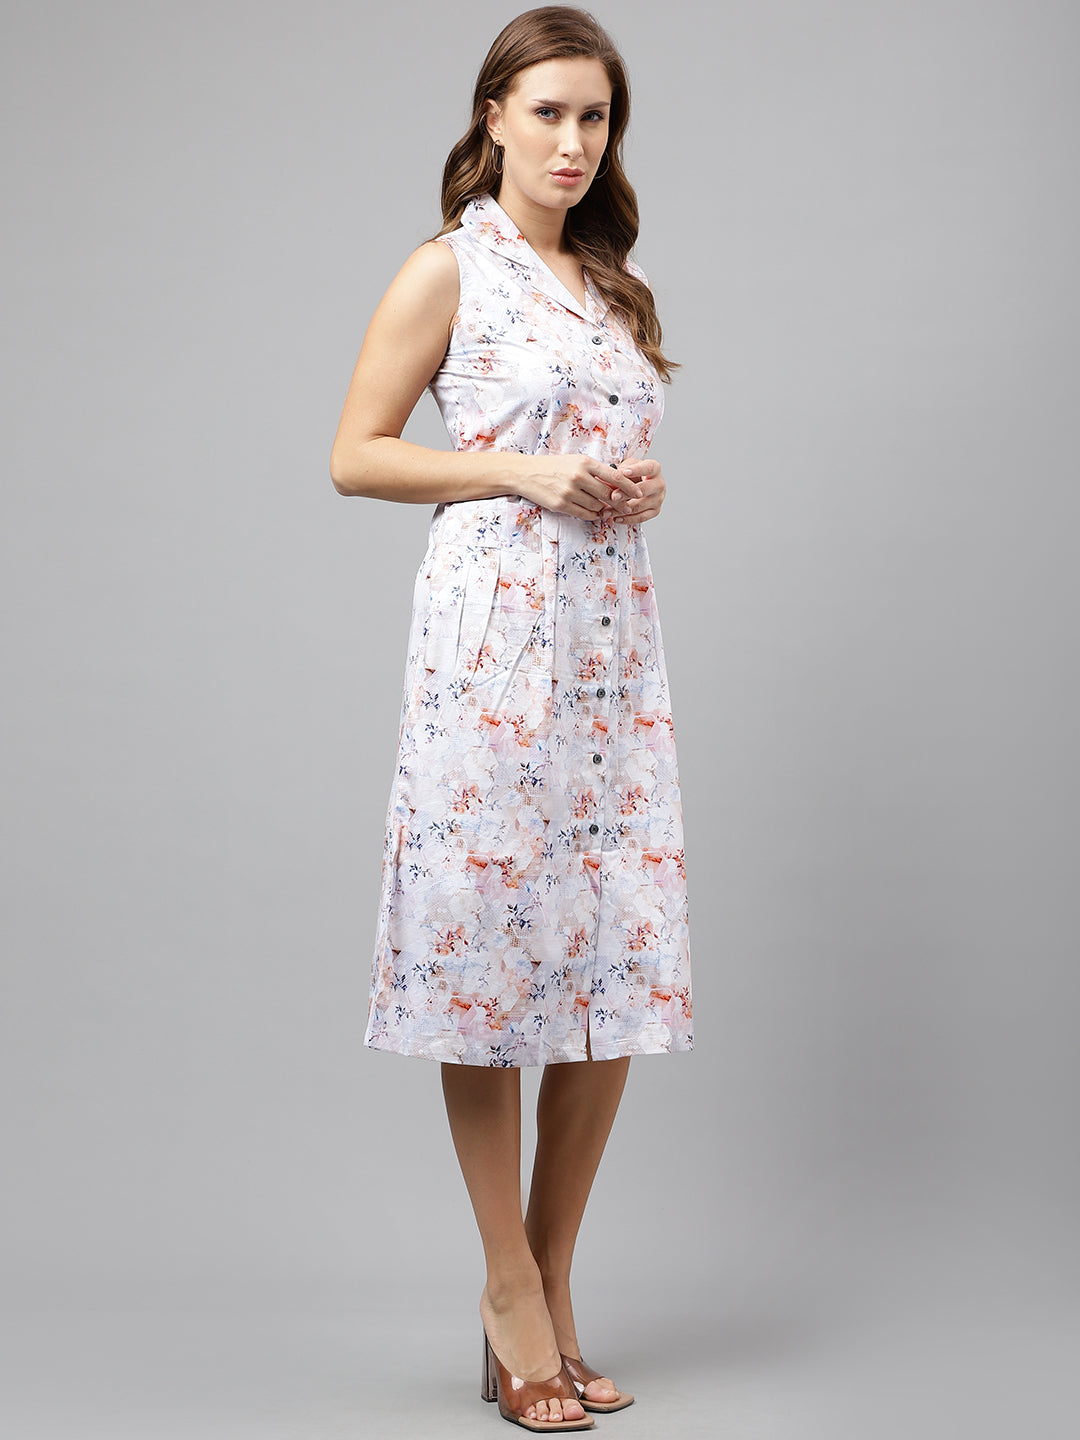 Women White & Pink Pure Cotton Floral Printed Mid Length Sleeveless Regular Fit Formal A-line Dress